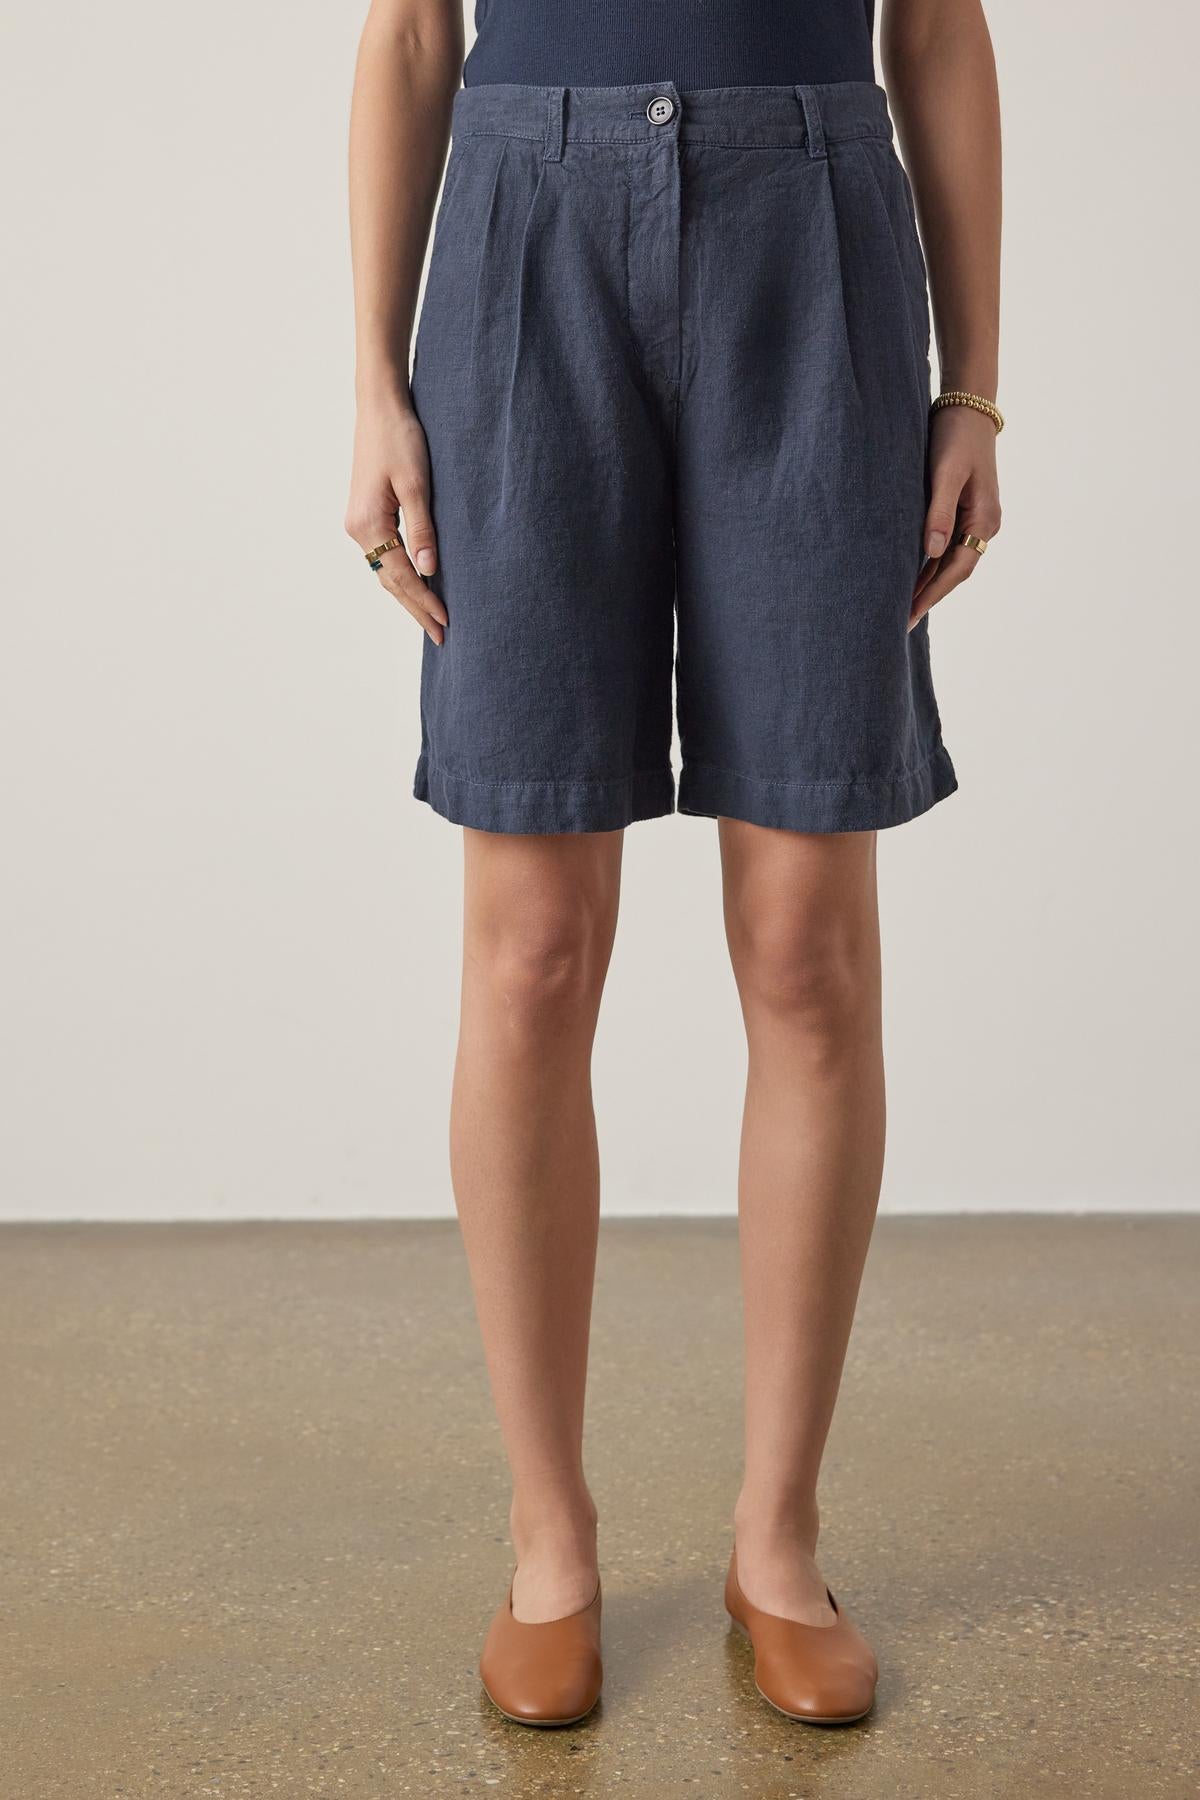   A woman stands wearing Velvet by Jenny Graham's LARCHMONT HEAVY LINEN SHORT and tan loafers, focusing on the lower half of the body against a neutral background. 